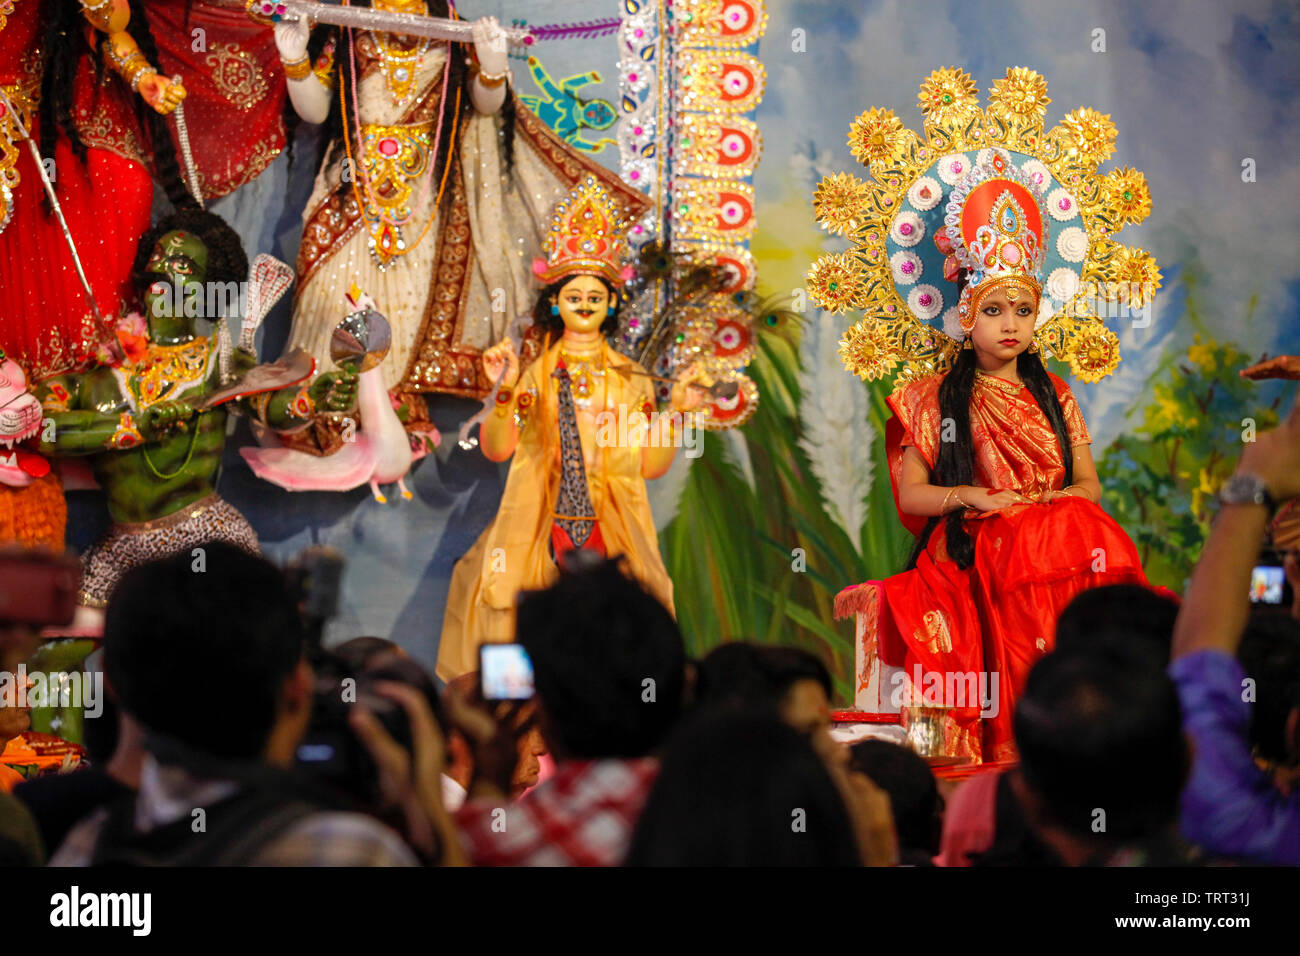 Kumari Puja a part of Durga Puja, during which a teenage girl is worshipped symbolically as a goddess. Kumari puja is held at the end of Mahastami puj Stock Photo